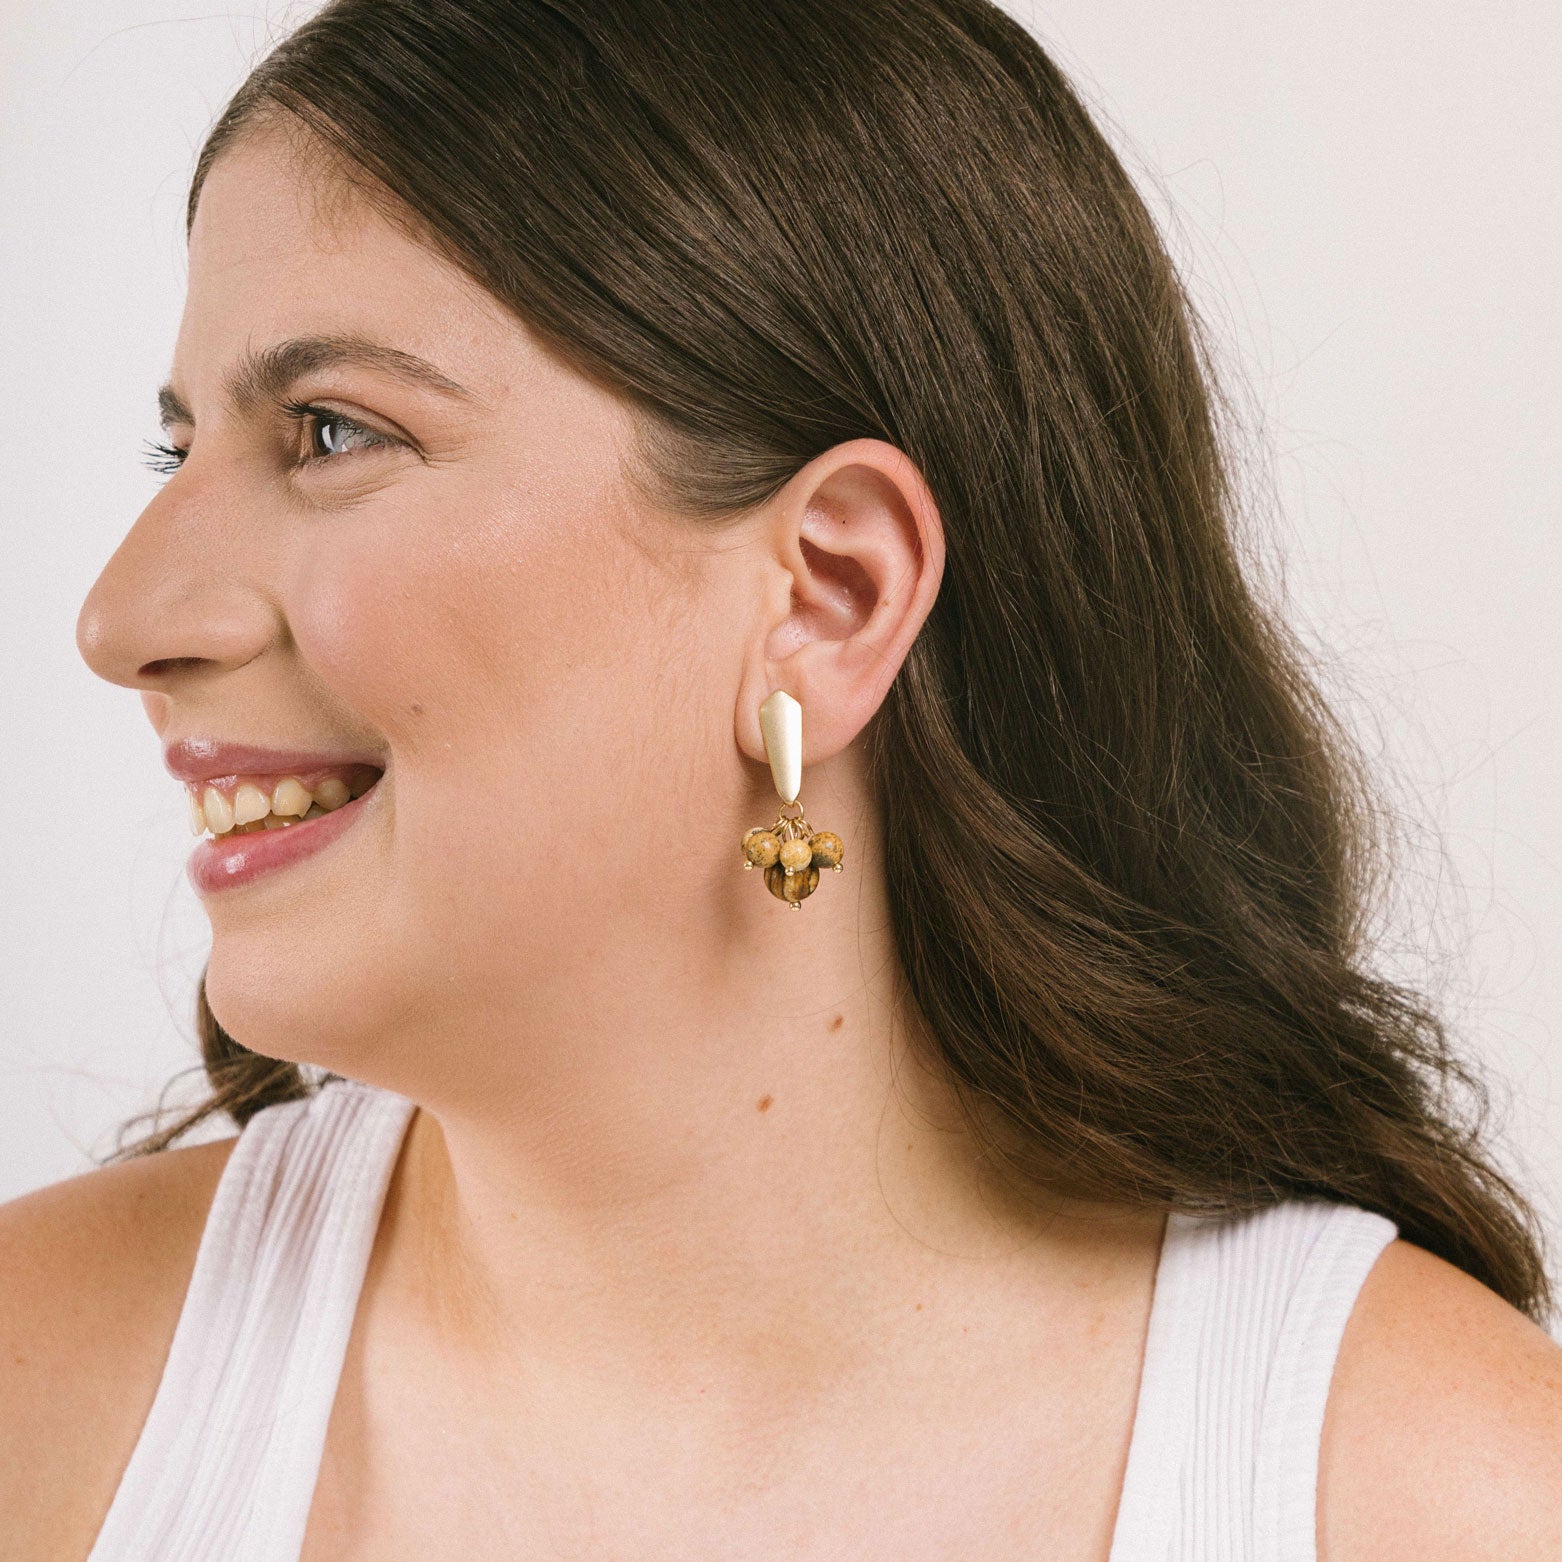 Model rocking a trendy light brown clip-on earrings. The matte gold tone copper alloy earrings feature agate and glass bead details. Securely fastened with padded closures, perfect for all ear types.